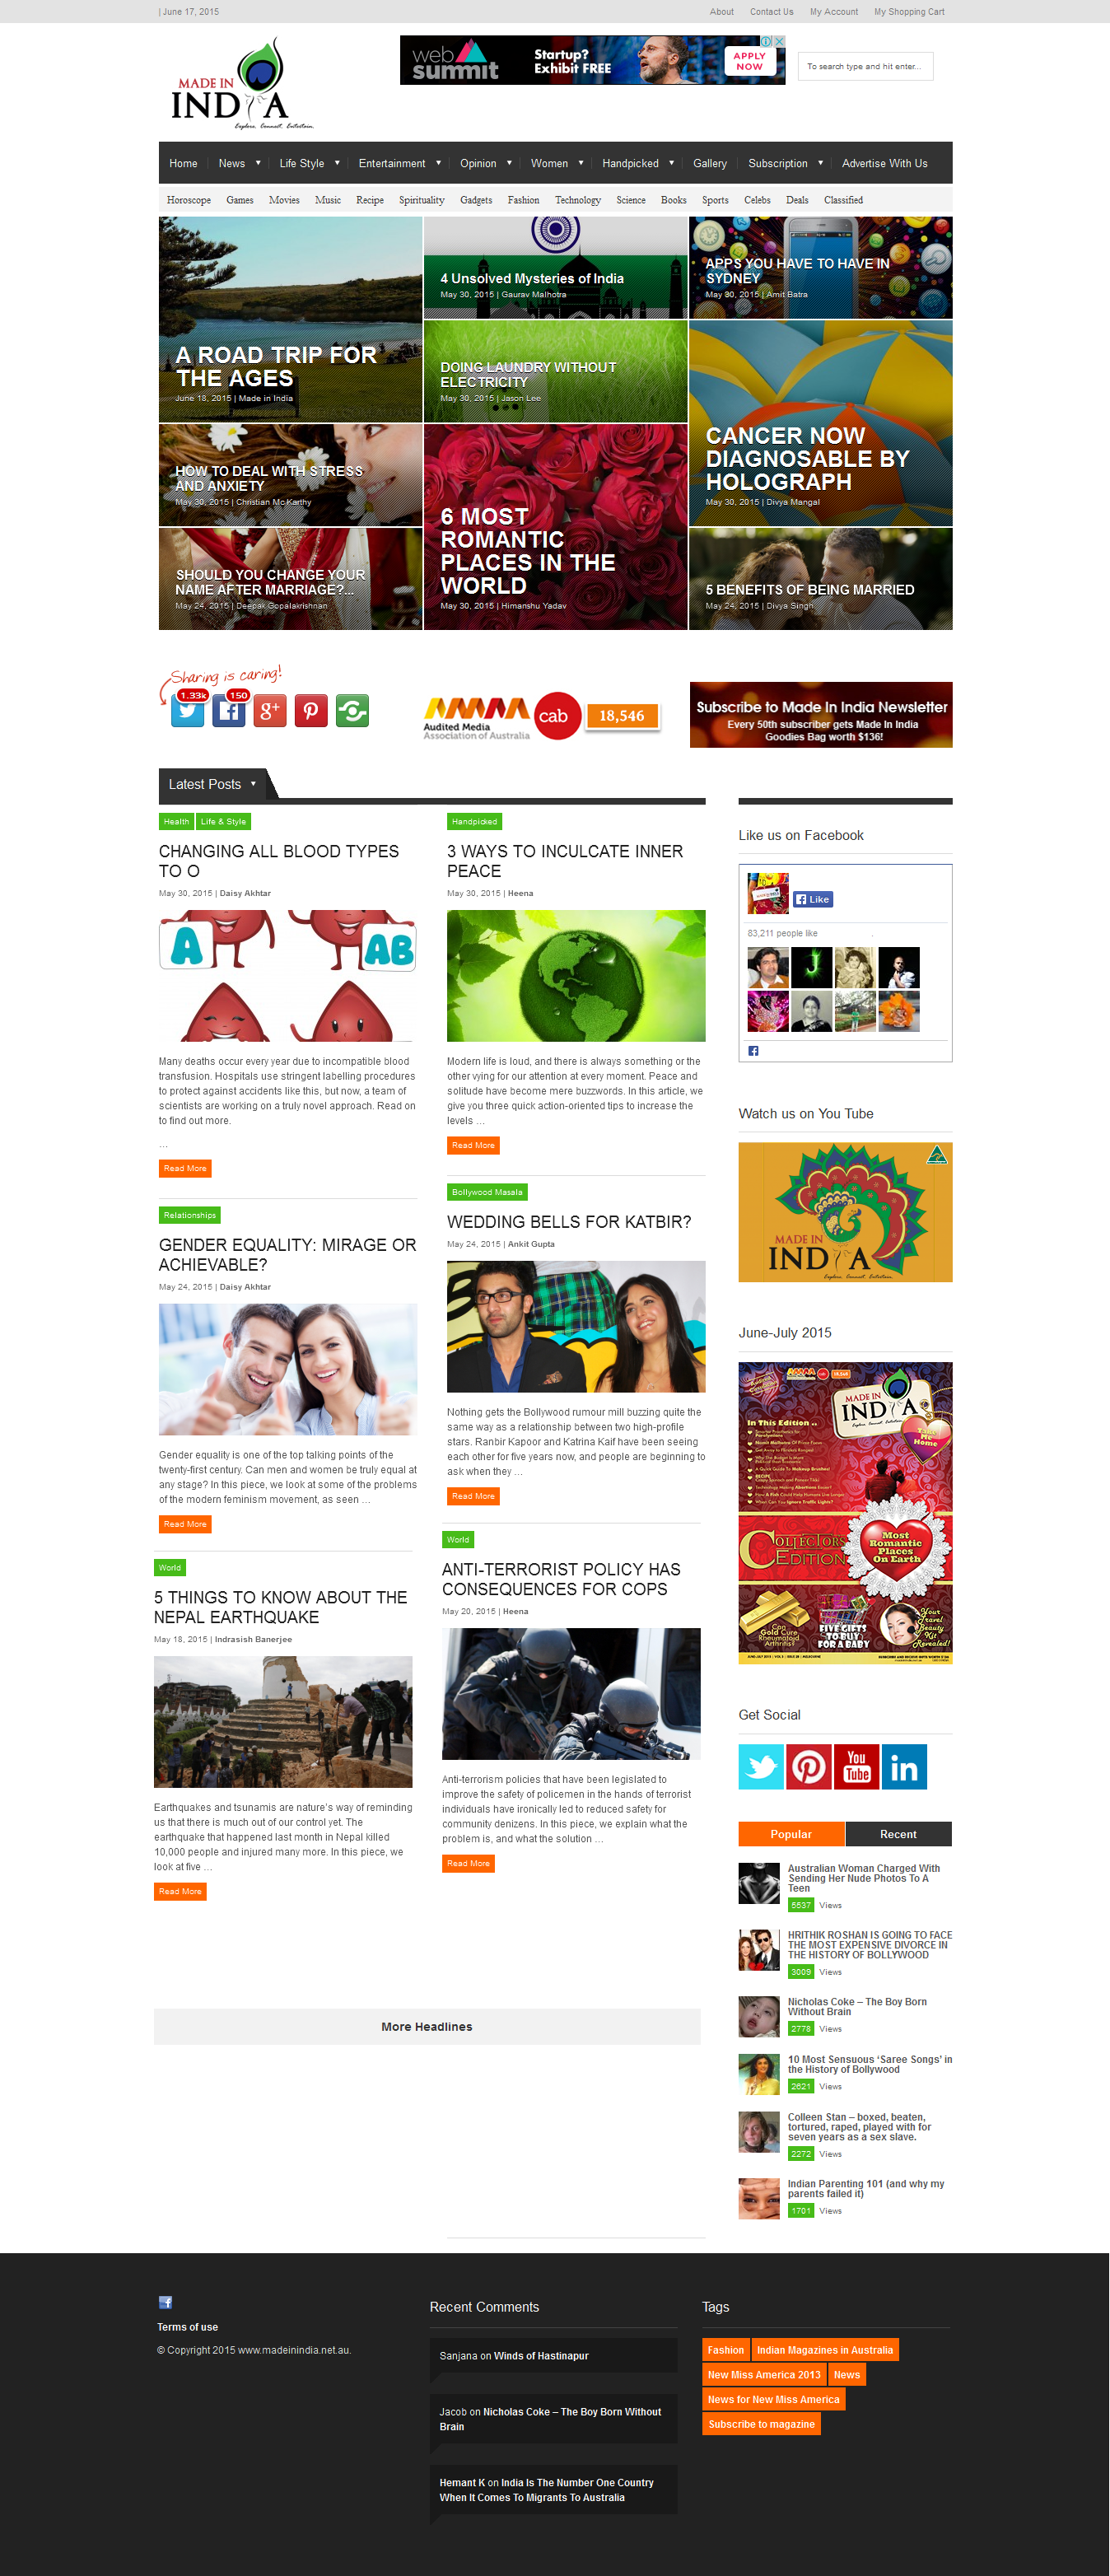 Made in India is a multicultural Lifestyle Indian newspaper Magazine in Australia